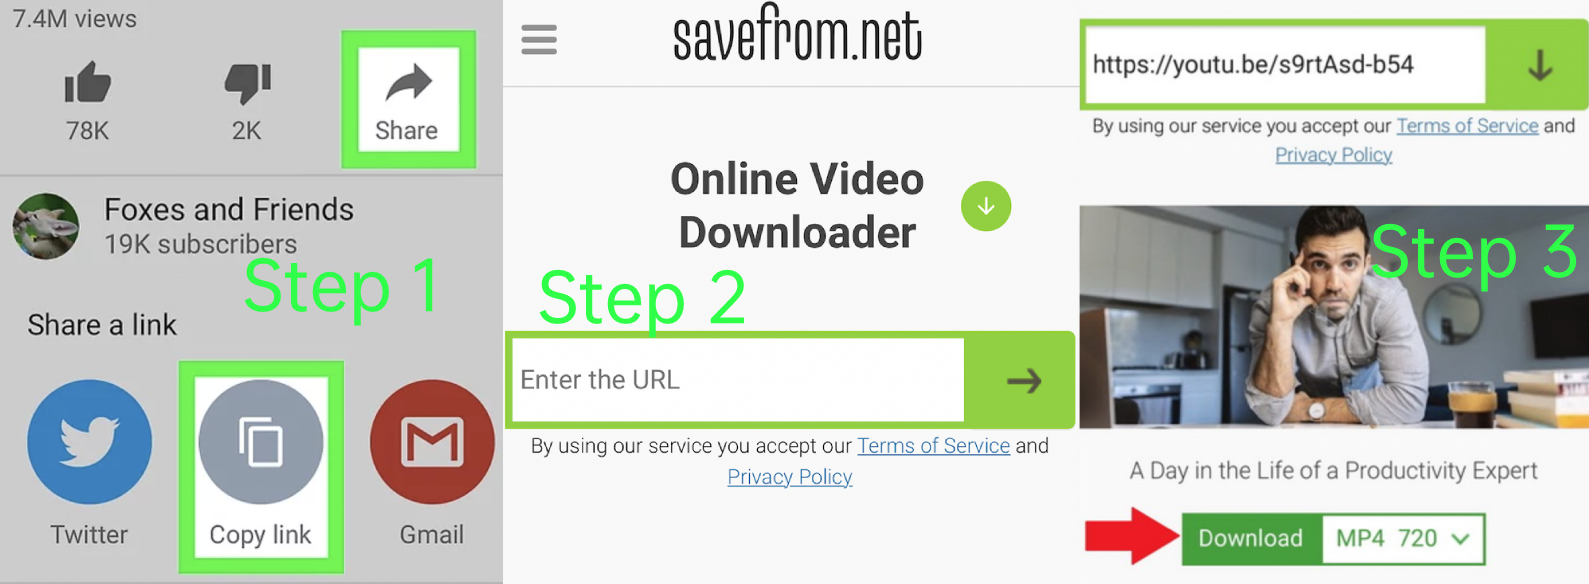 Downloading YouTube videos on iPhone using Savefrom